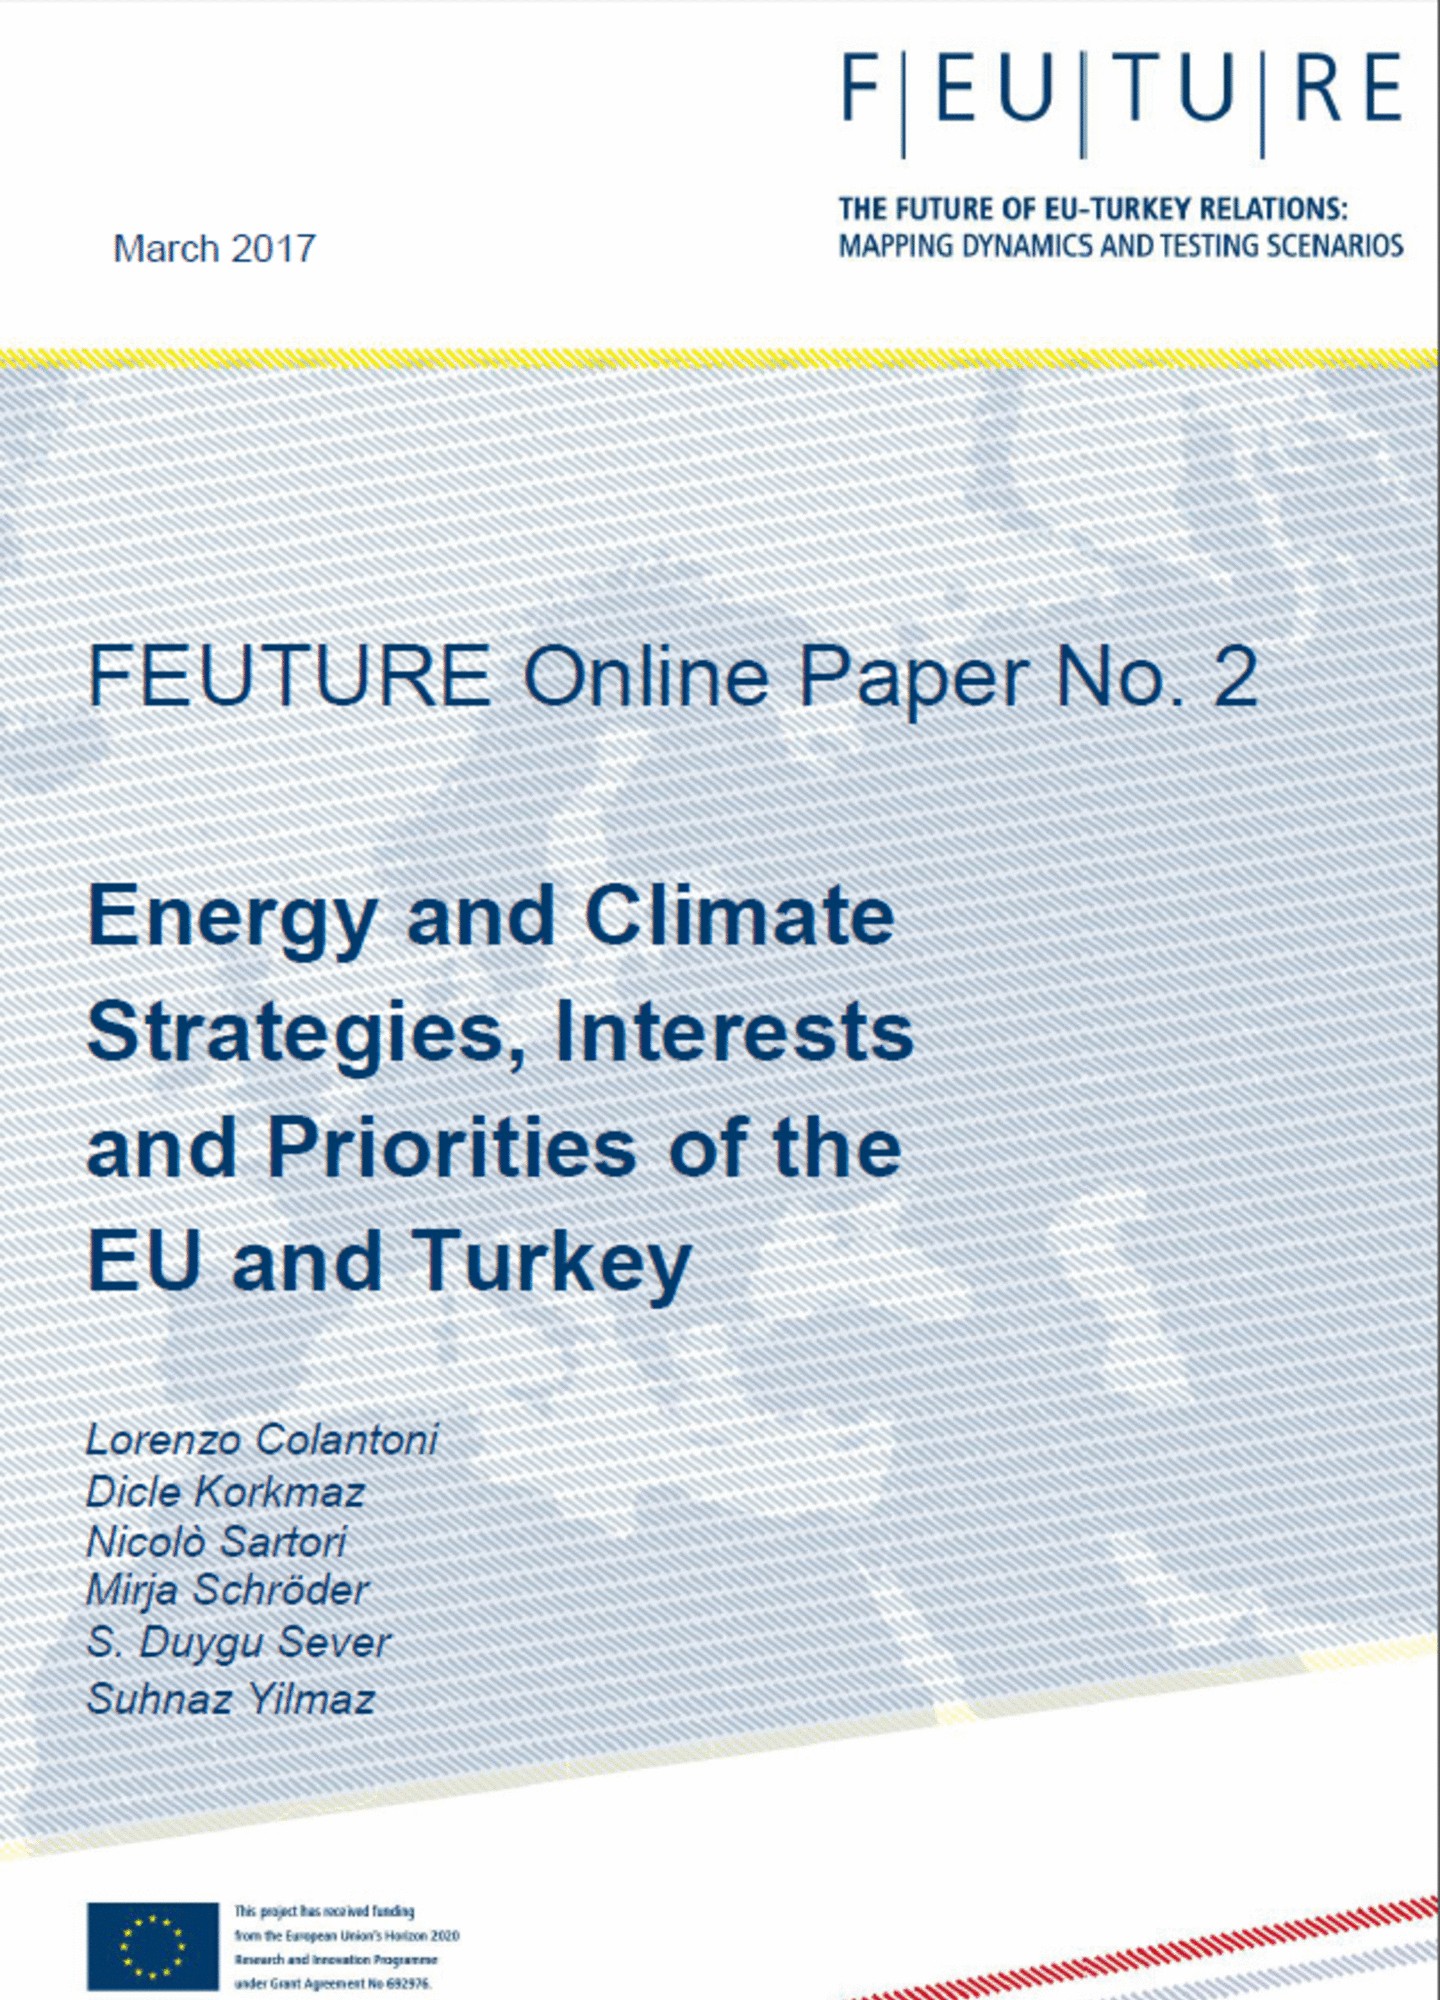 Energy and Climate Strategies, Interests and Priorities of the EU and Turkey